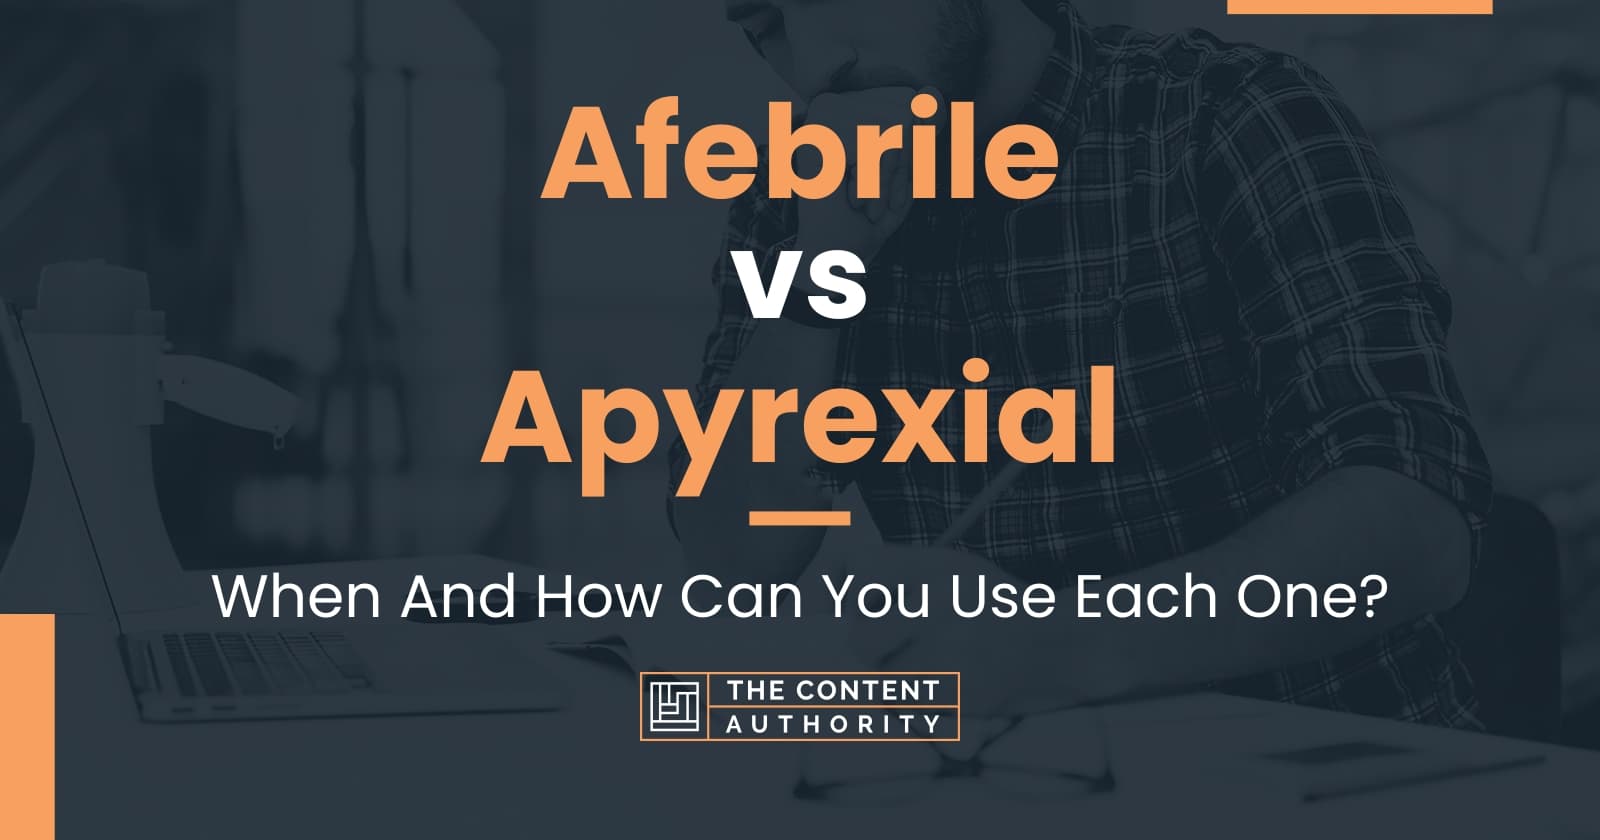 Afebrile vs Apyrexial: When And How Can You Use Each One?